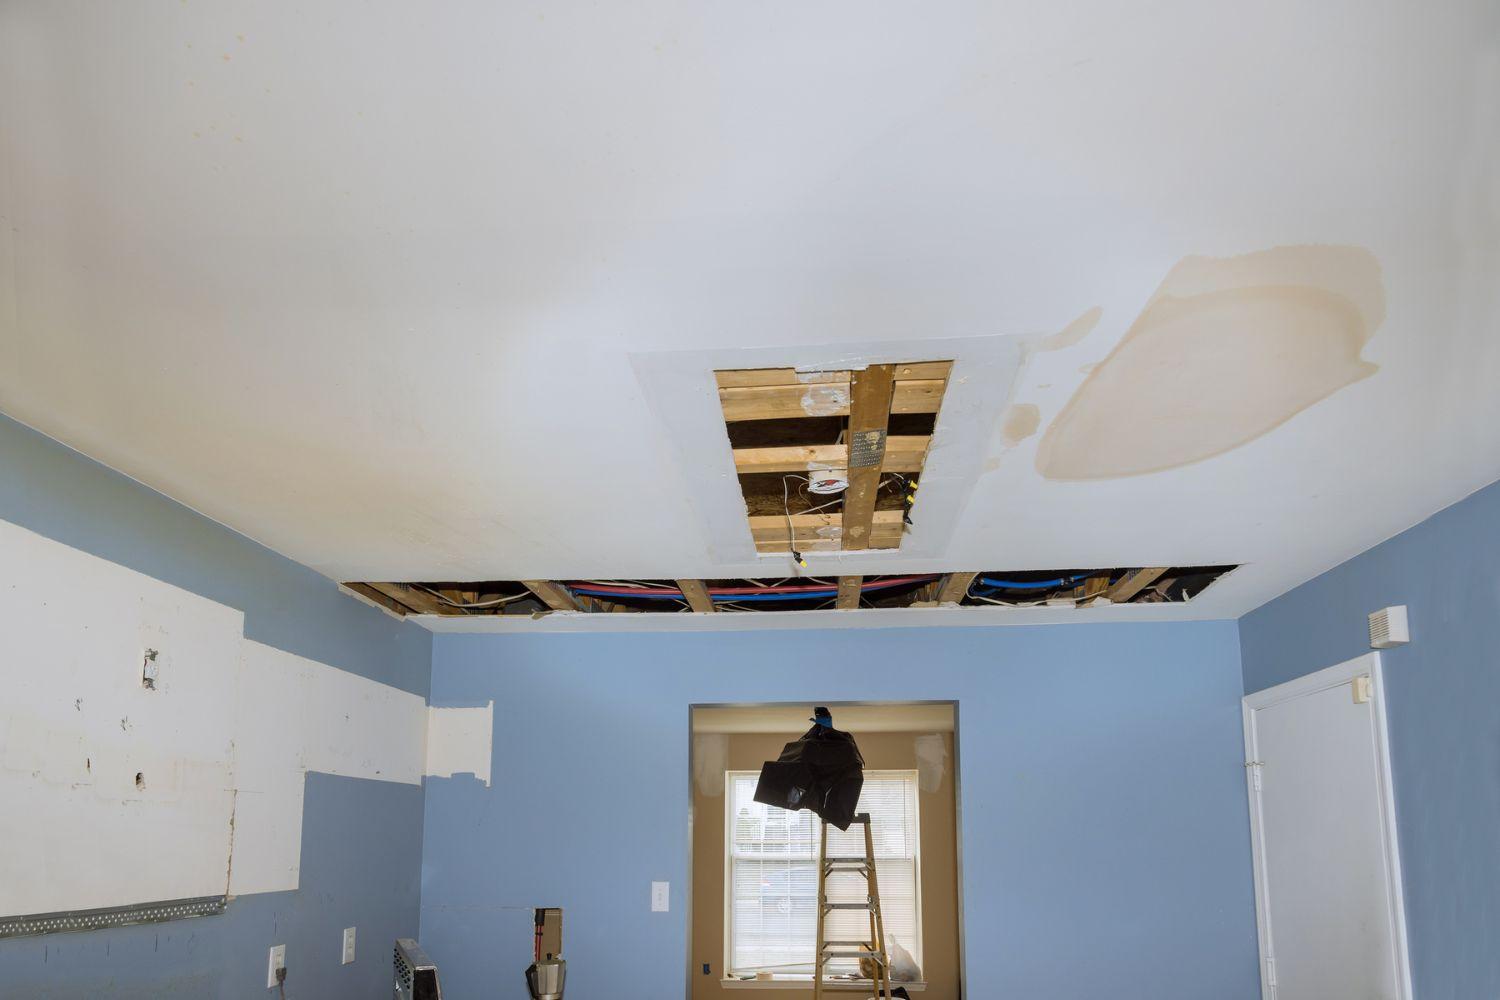 Who to Call for Water Leak in Ceiling